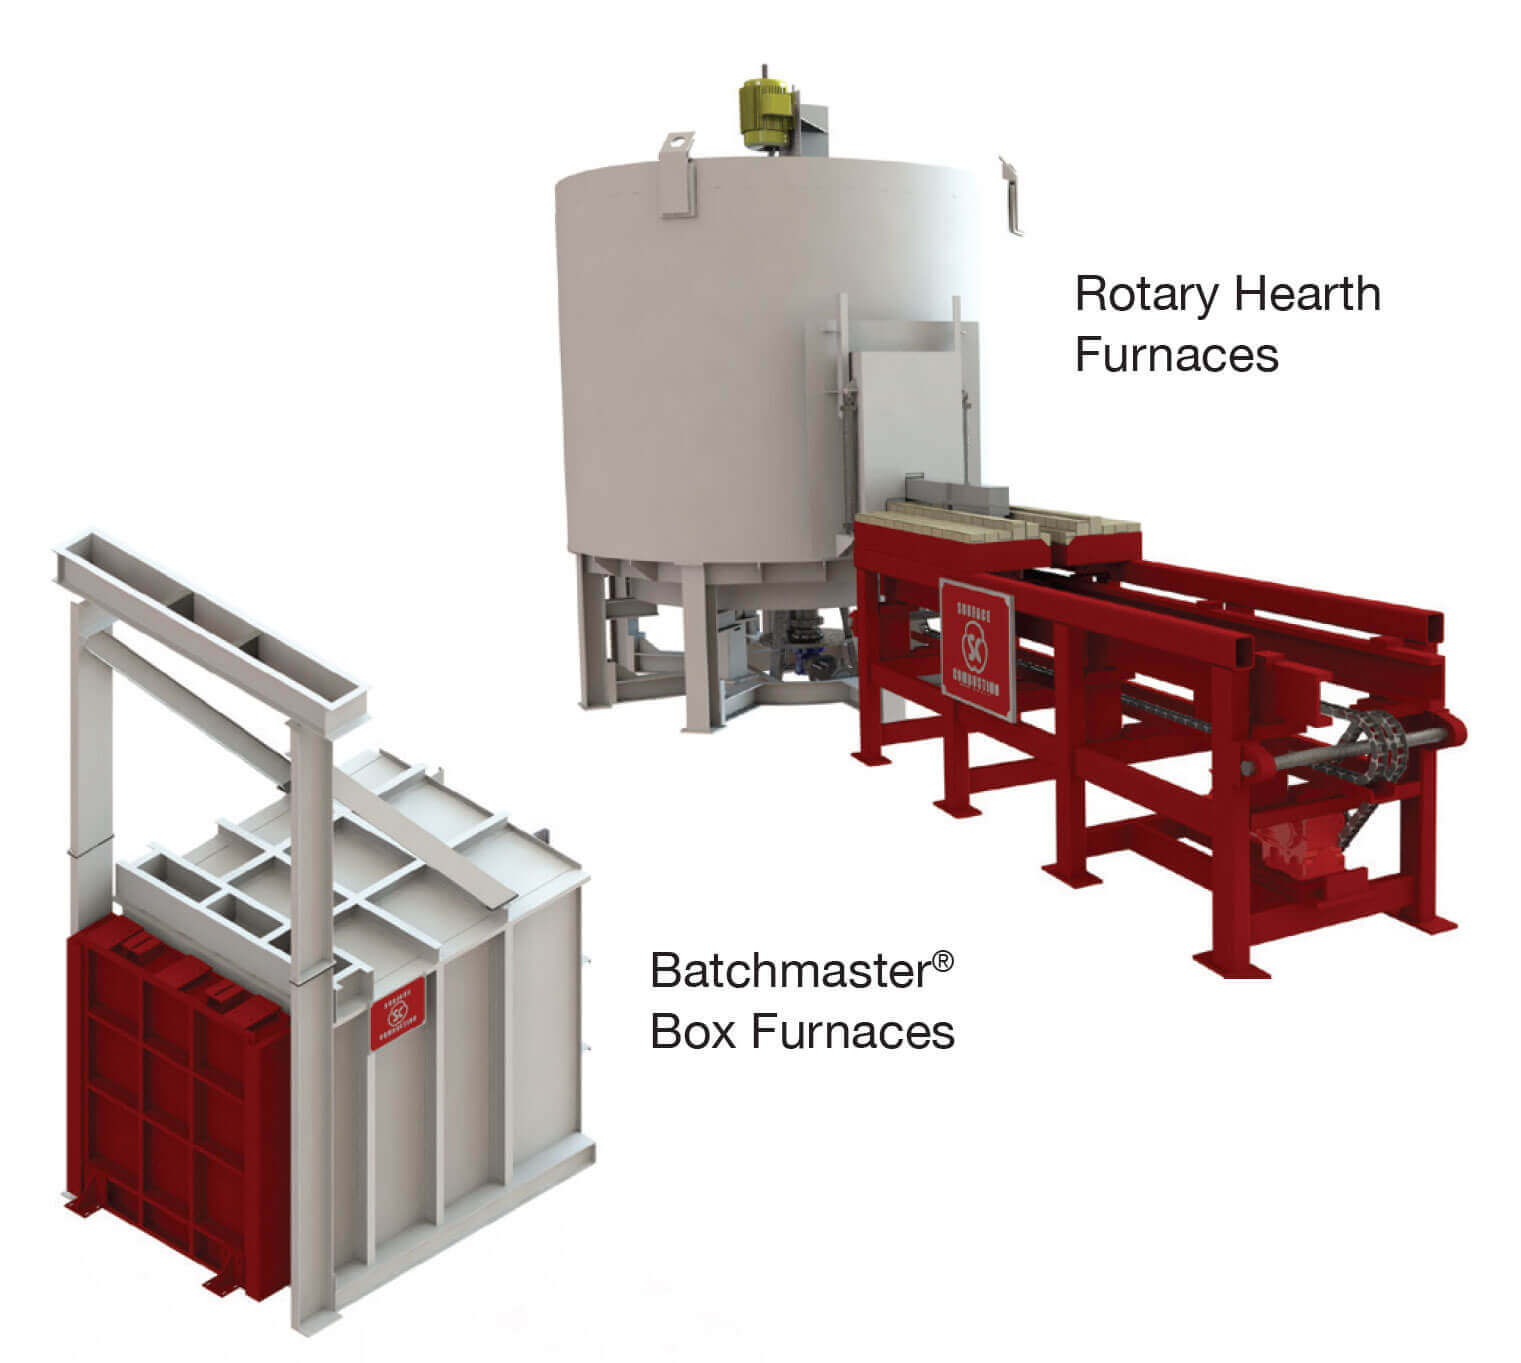 Rotary Hearth and Batchmaster® Box Furnaces